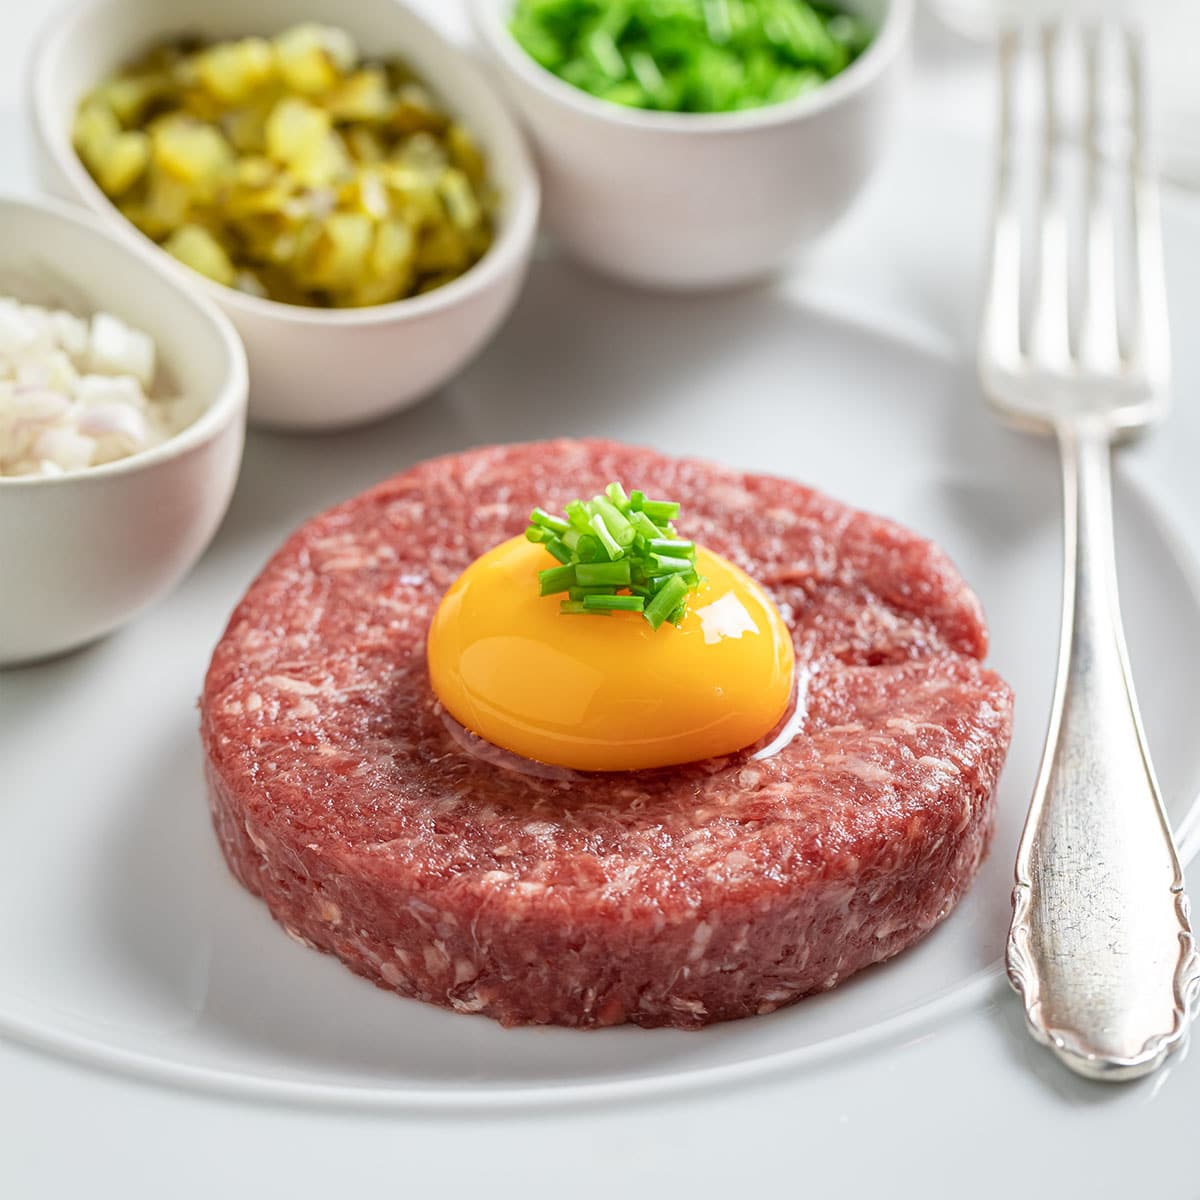 Marinating ground beef is a simple way to add flavor and make it more tender. You can marinate any ground, although leaner cuts will benefit more from the tenderizing effect of the marinade.